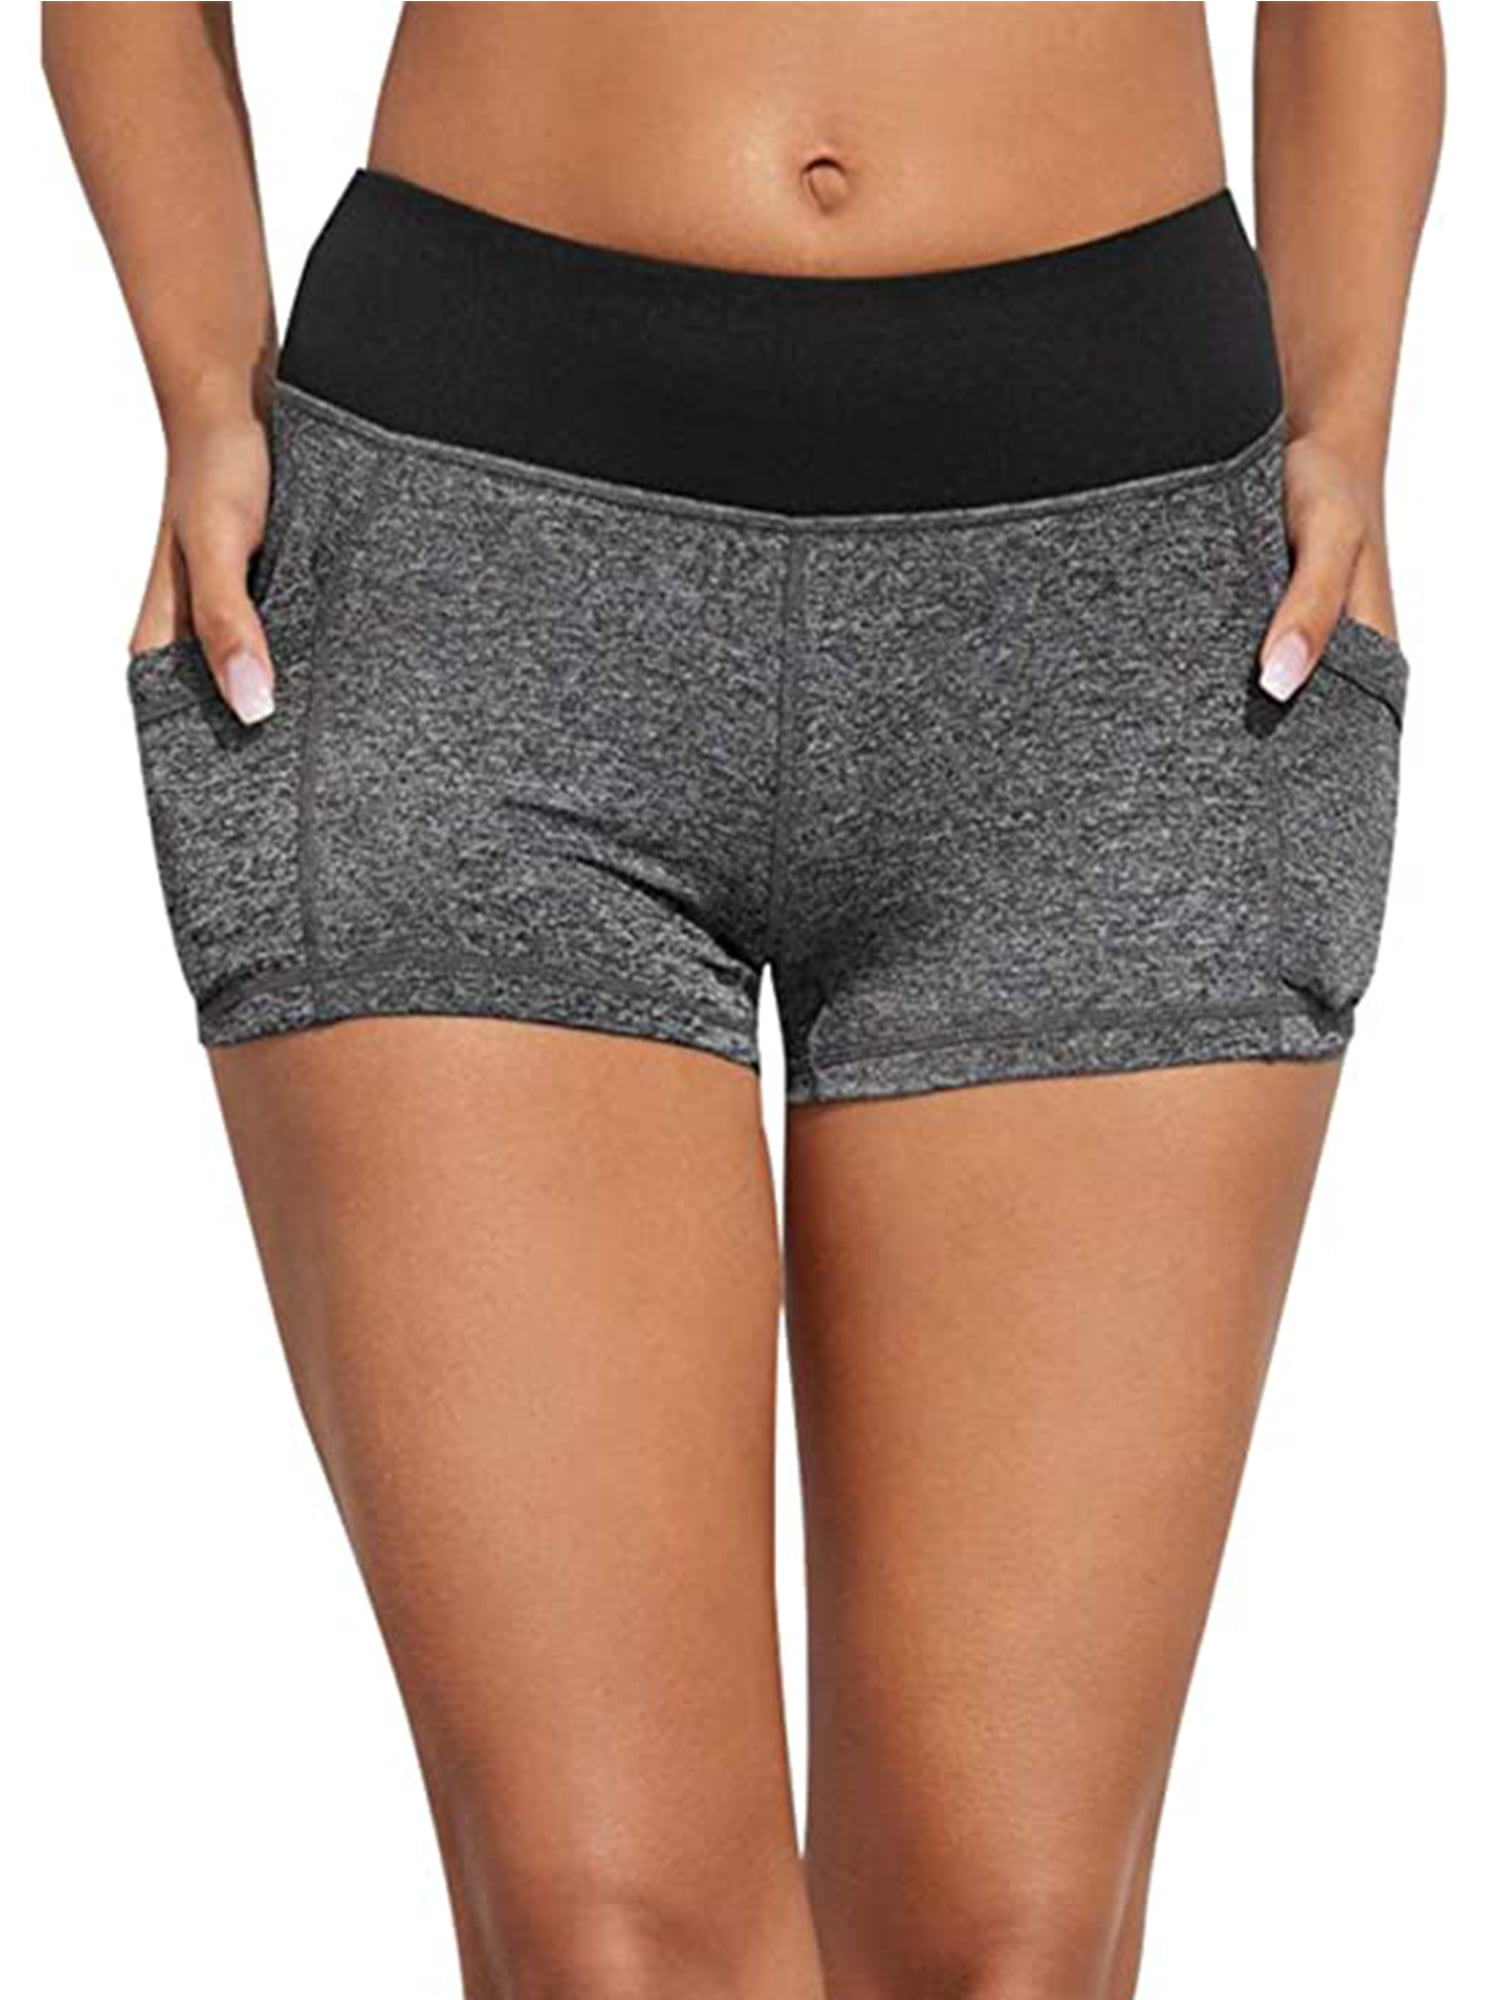 Women High Waist Workout Yoga Shorts With Tow Pockets Tummy Control Bike Shorts Running Exercise